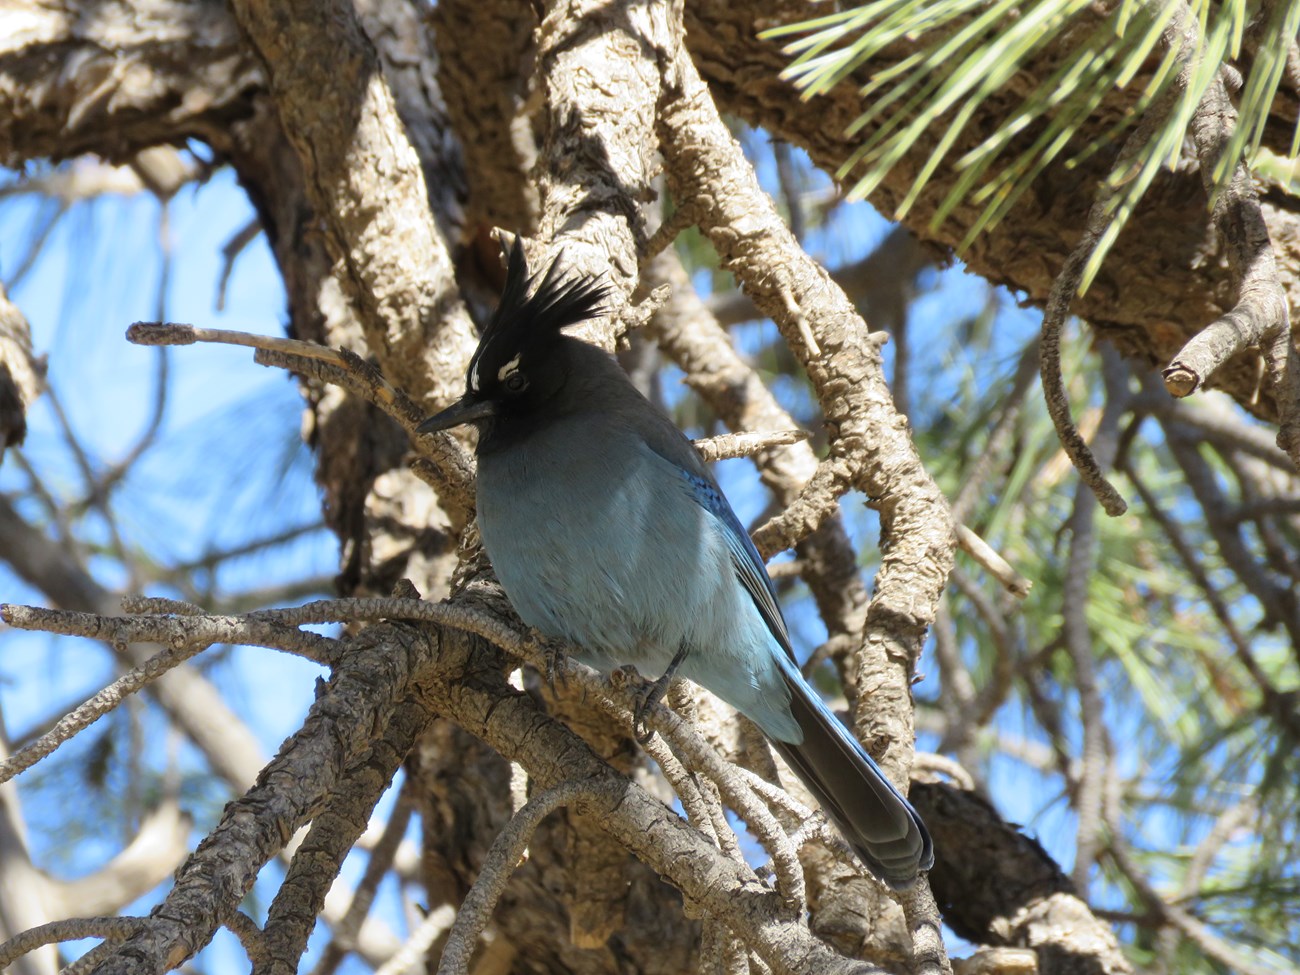 A Steller's Jay with its black crest and blue wings perches on a pine tree.